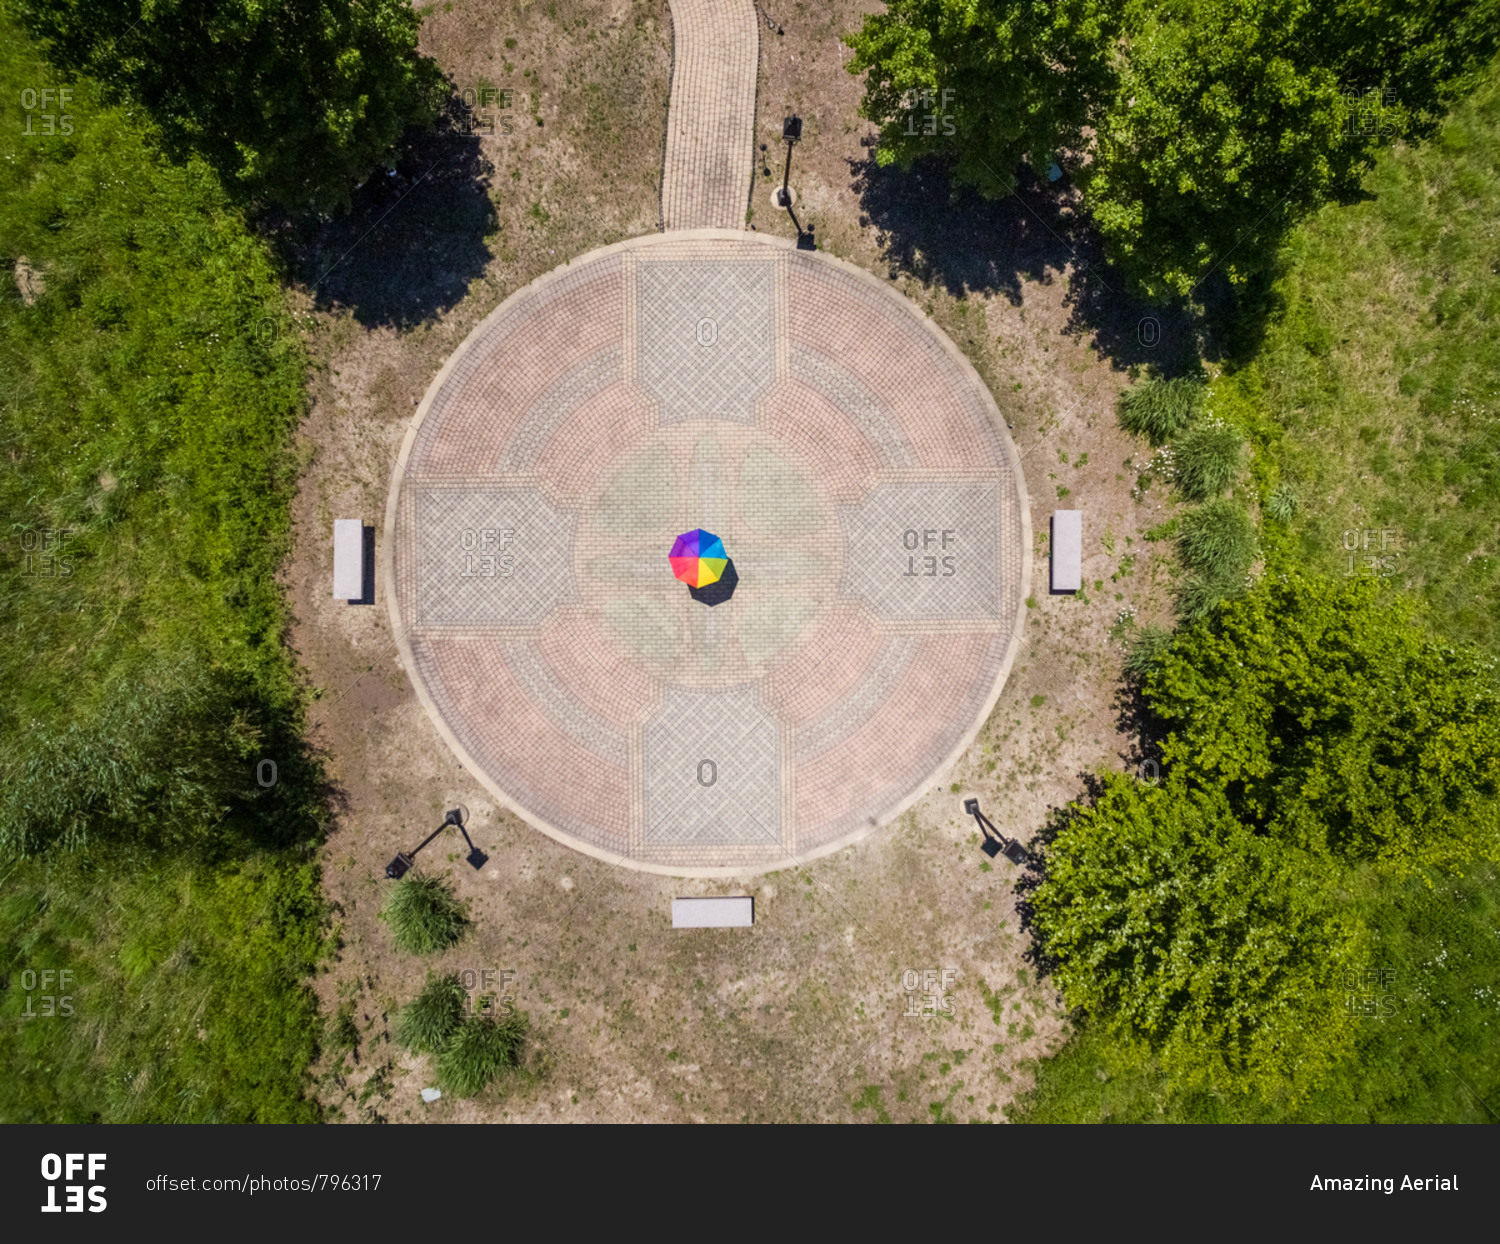 Aerial view of person holding colorful umbrella on pebble background, USA.